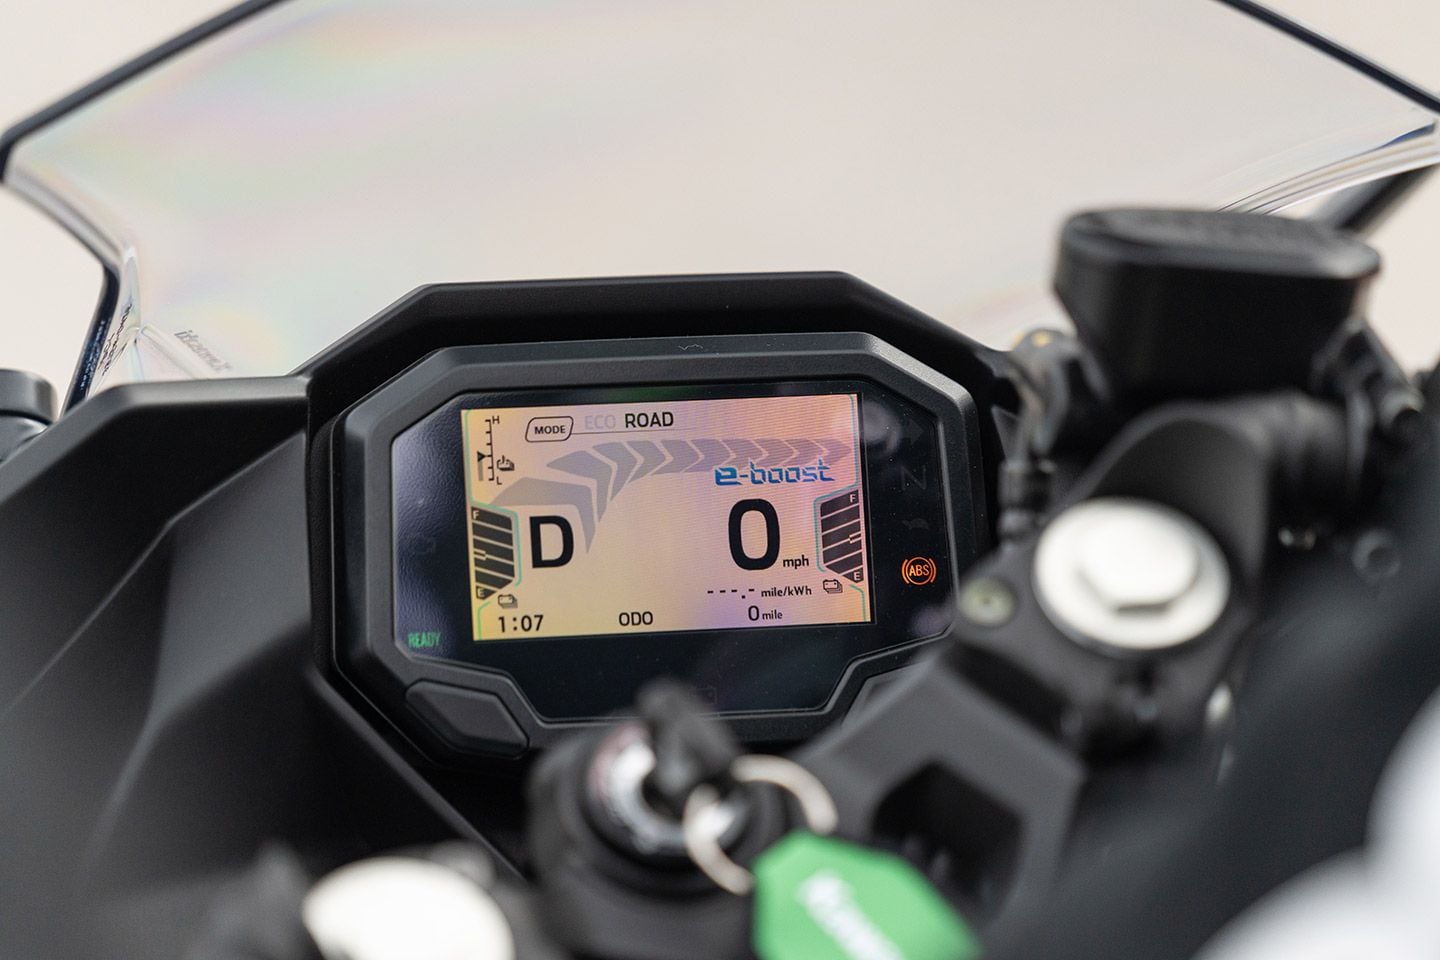 A 4.3-inch TFT display has two battery gauges and other pertinent information. E-boost bars will disappear as that function is used.